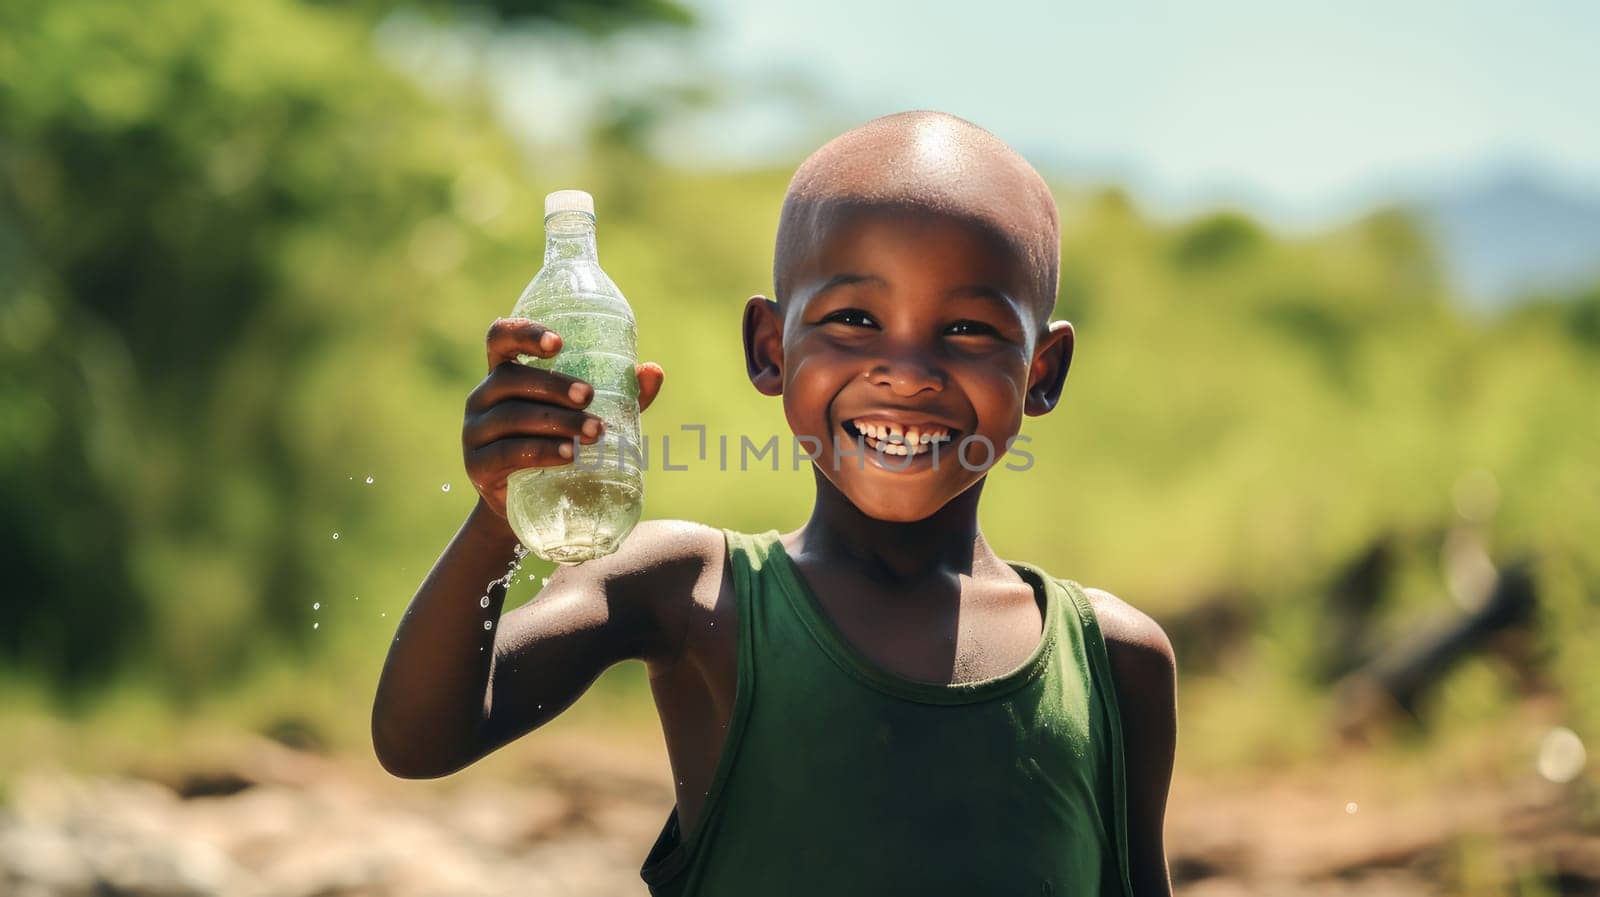 Poor, beggar, hungry smiling child in Africa thirsty to drink water from plastic bottle. water shortage on Earth due to global warming, drought and famine. Climate change, crisis environment and water crisis. Saving natural resources, planet suffers